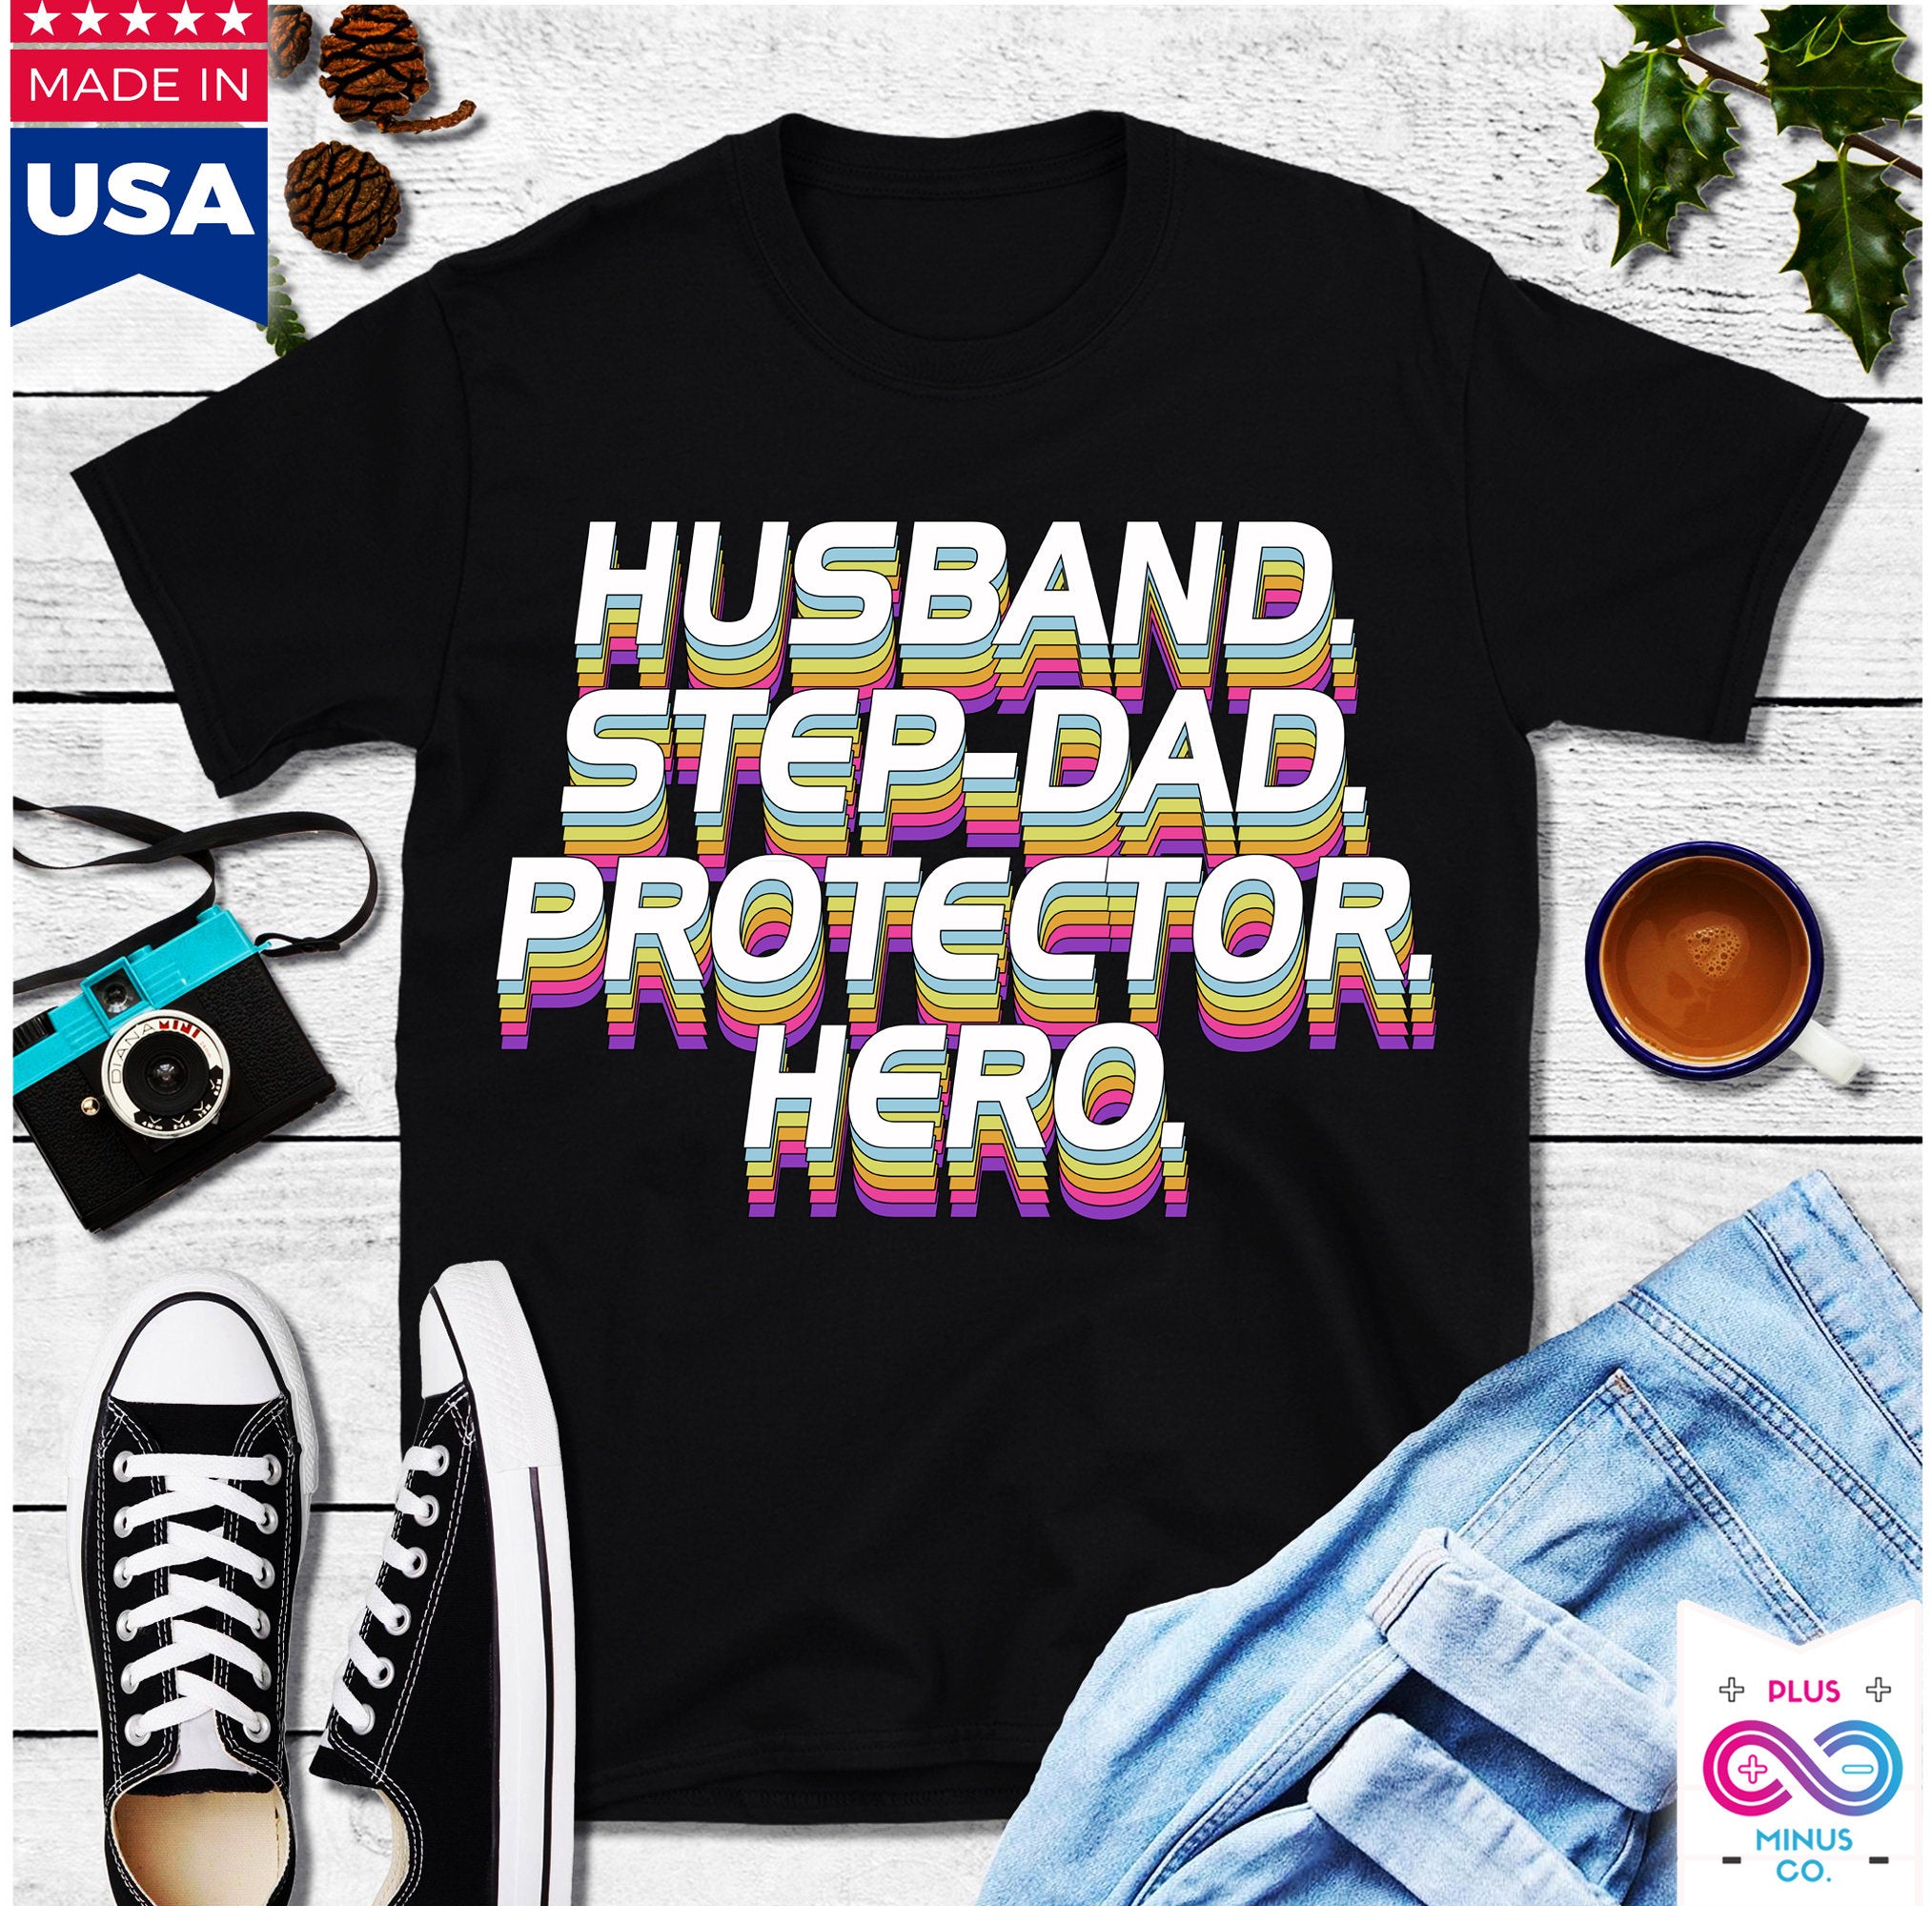 Husband Daddy Protector Hero T-Shirts, Fathers Day Gift, Personalized Dad Shirt, Hero Shirt, Fathers Day Gift, Dad Tshirt, Fathers Day Shirt - plusminusco.com